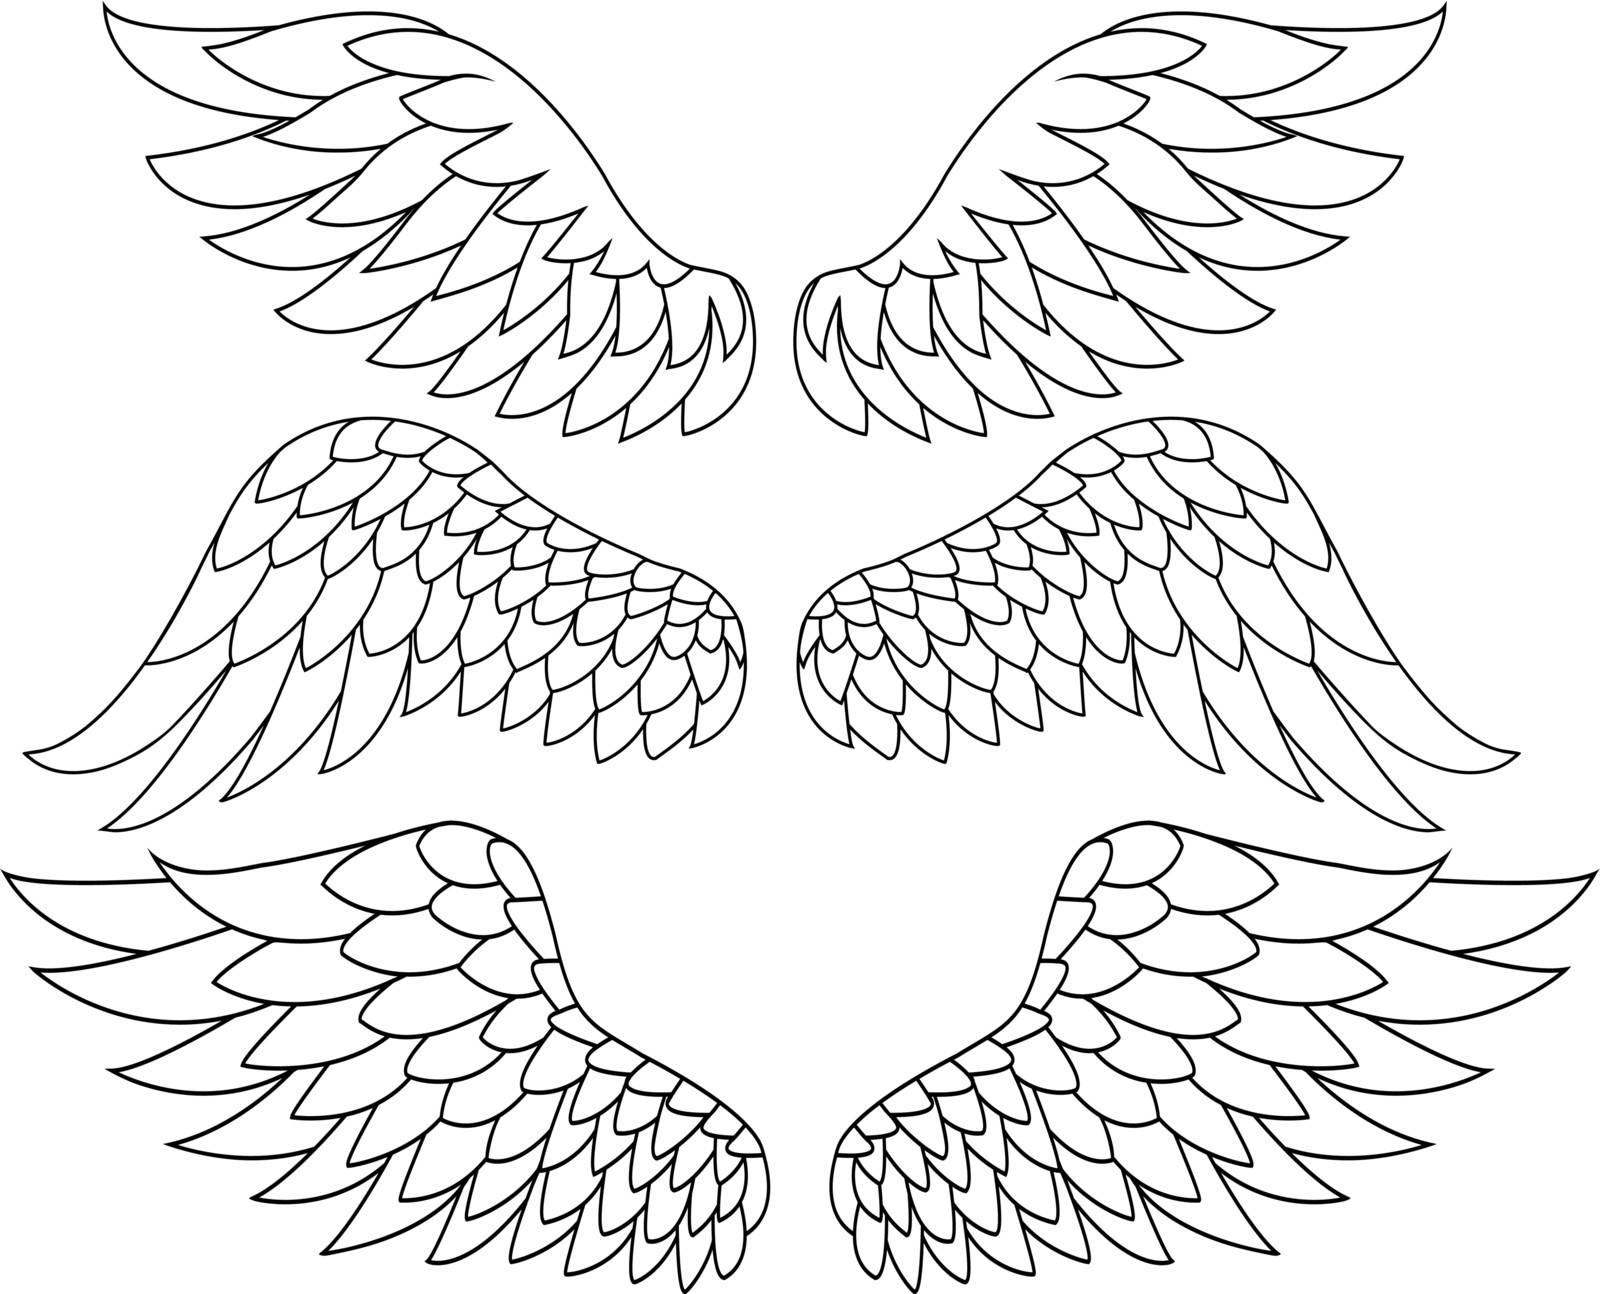 Vector Illustration Of Wings